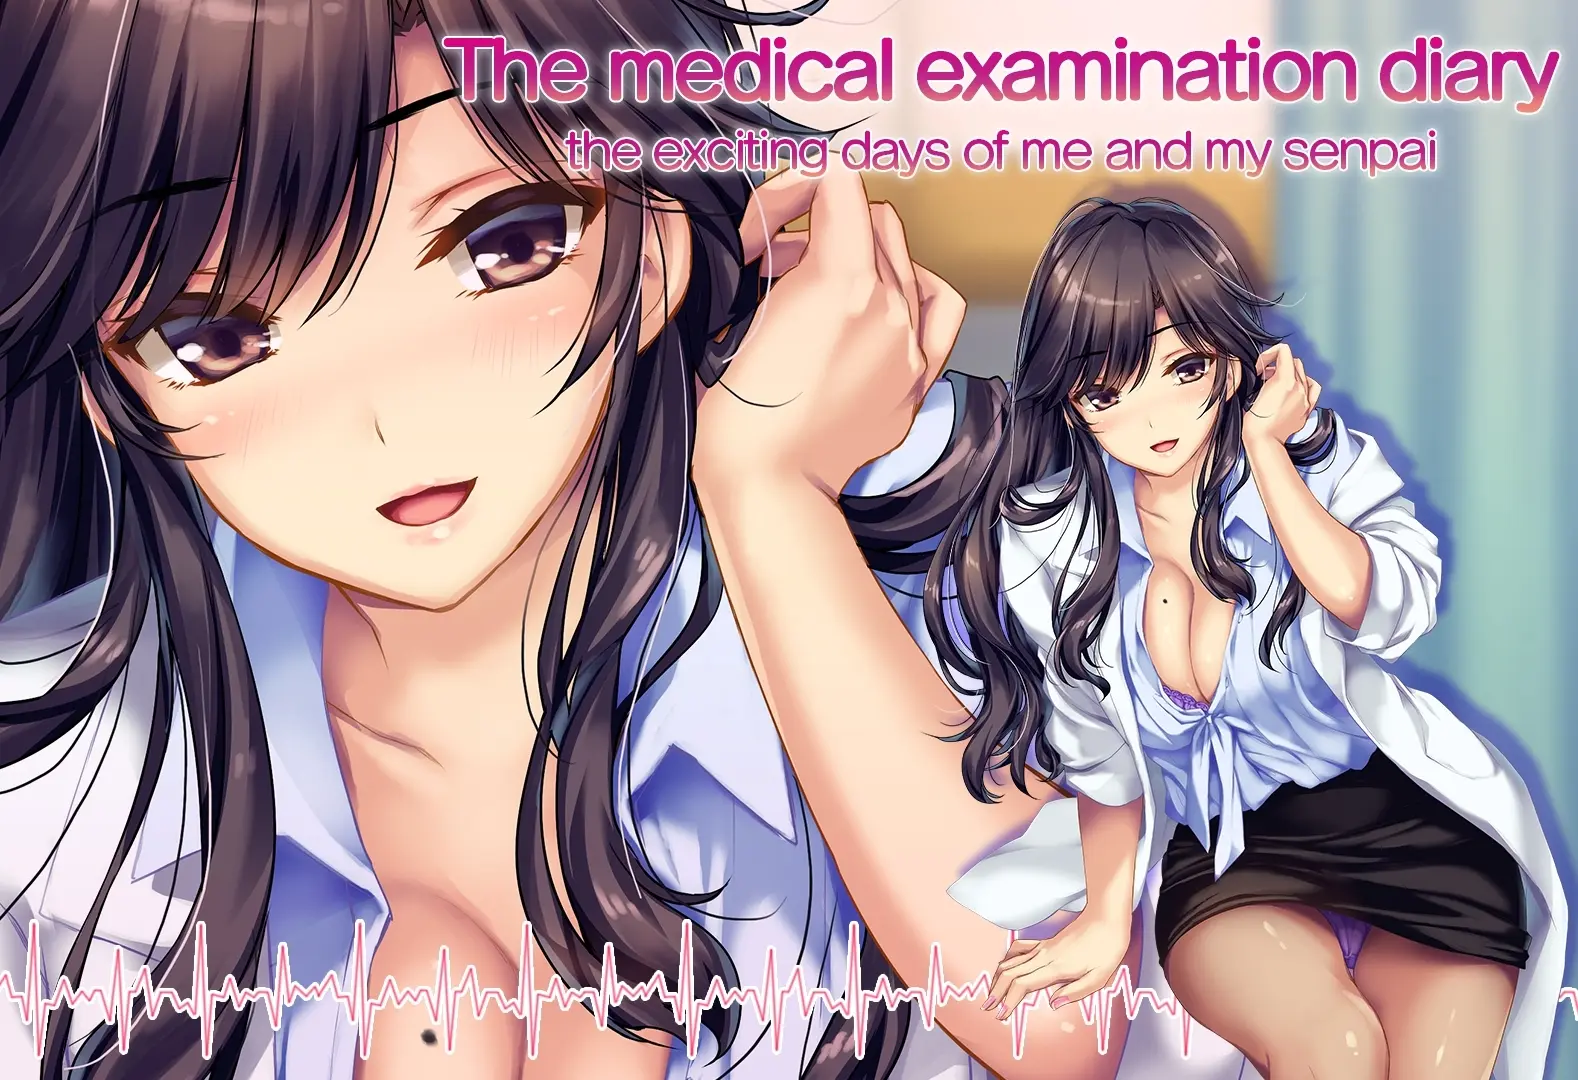 The Medical Examination Diary: The Exciting Days of Me and My Senpai main image